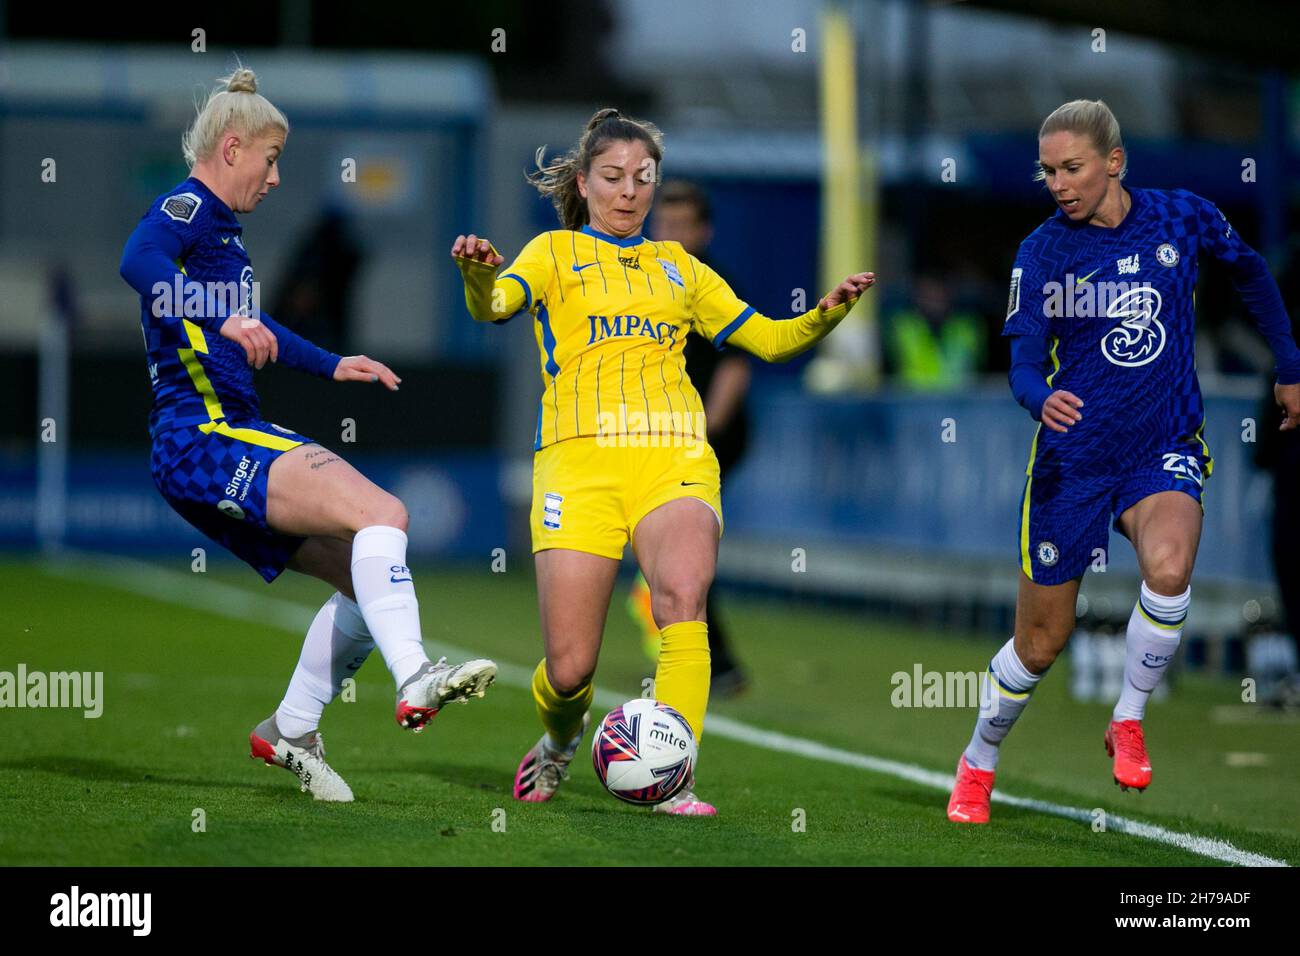 London, UK. 21st Nov, 2021. LONDON, UK. NOVEMBER 21ST : Jonna Andersson of Chelsea FC battle for the ball during the 2021-22 FA Womens Superleague fixture between Chelsea FC and Birmingham City at Kingsmeadow. Credit: Federico Guerra Morán/Alamy Live News Stock Photo